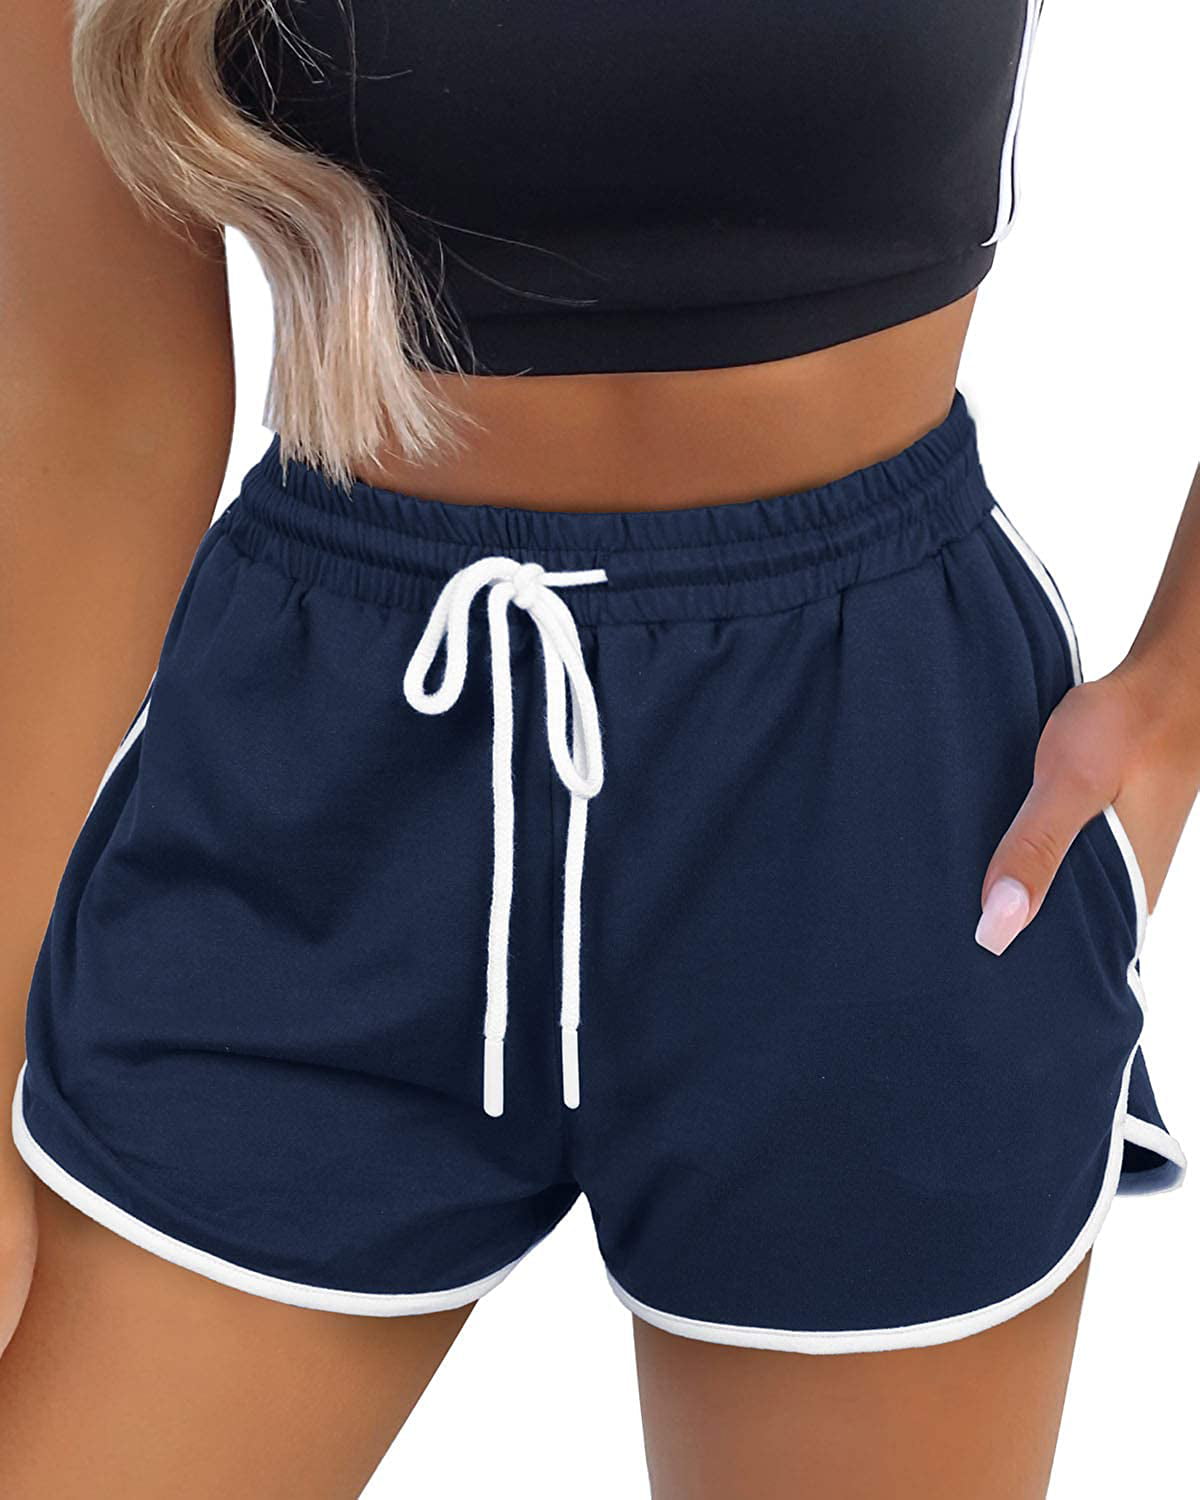 Heldig Womens Workout Shorts with Pockets Tie Dye Athletic Shorts Plain ...